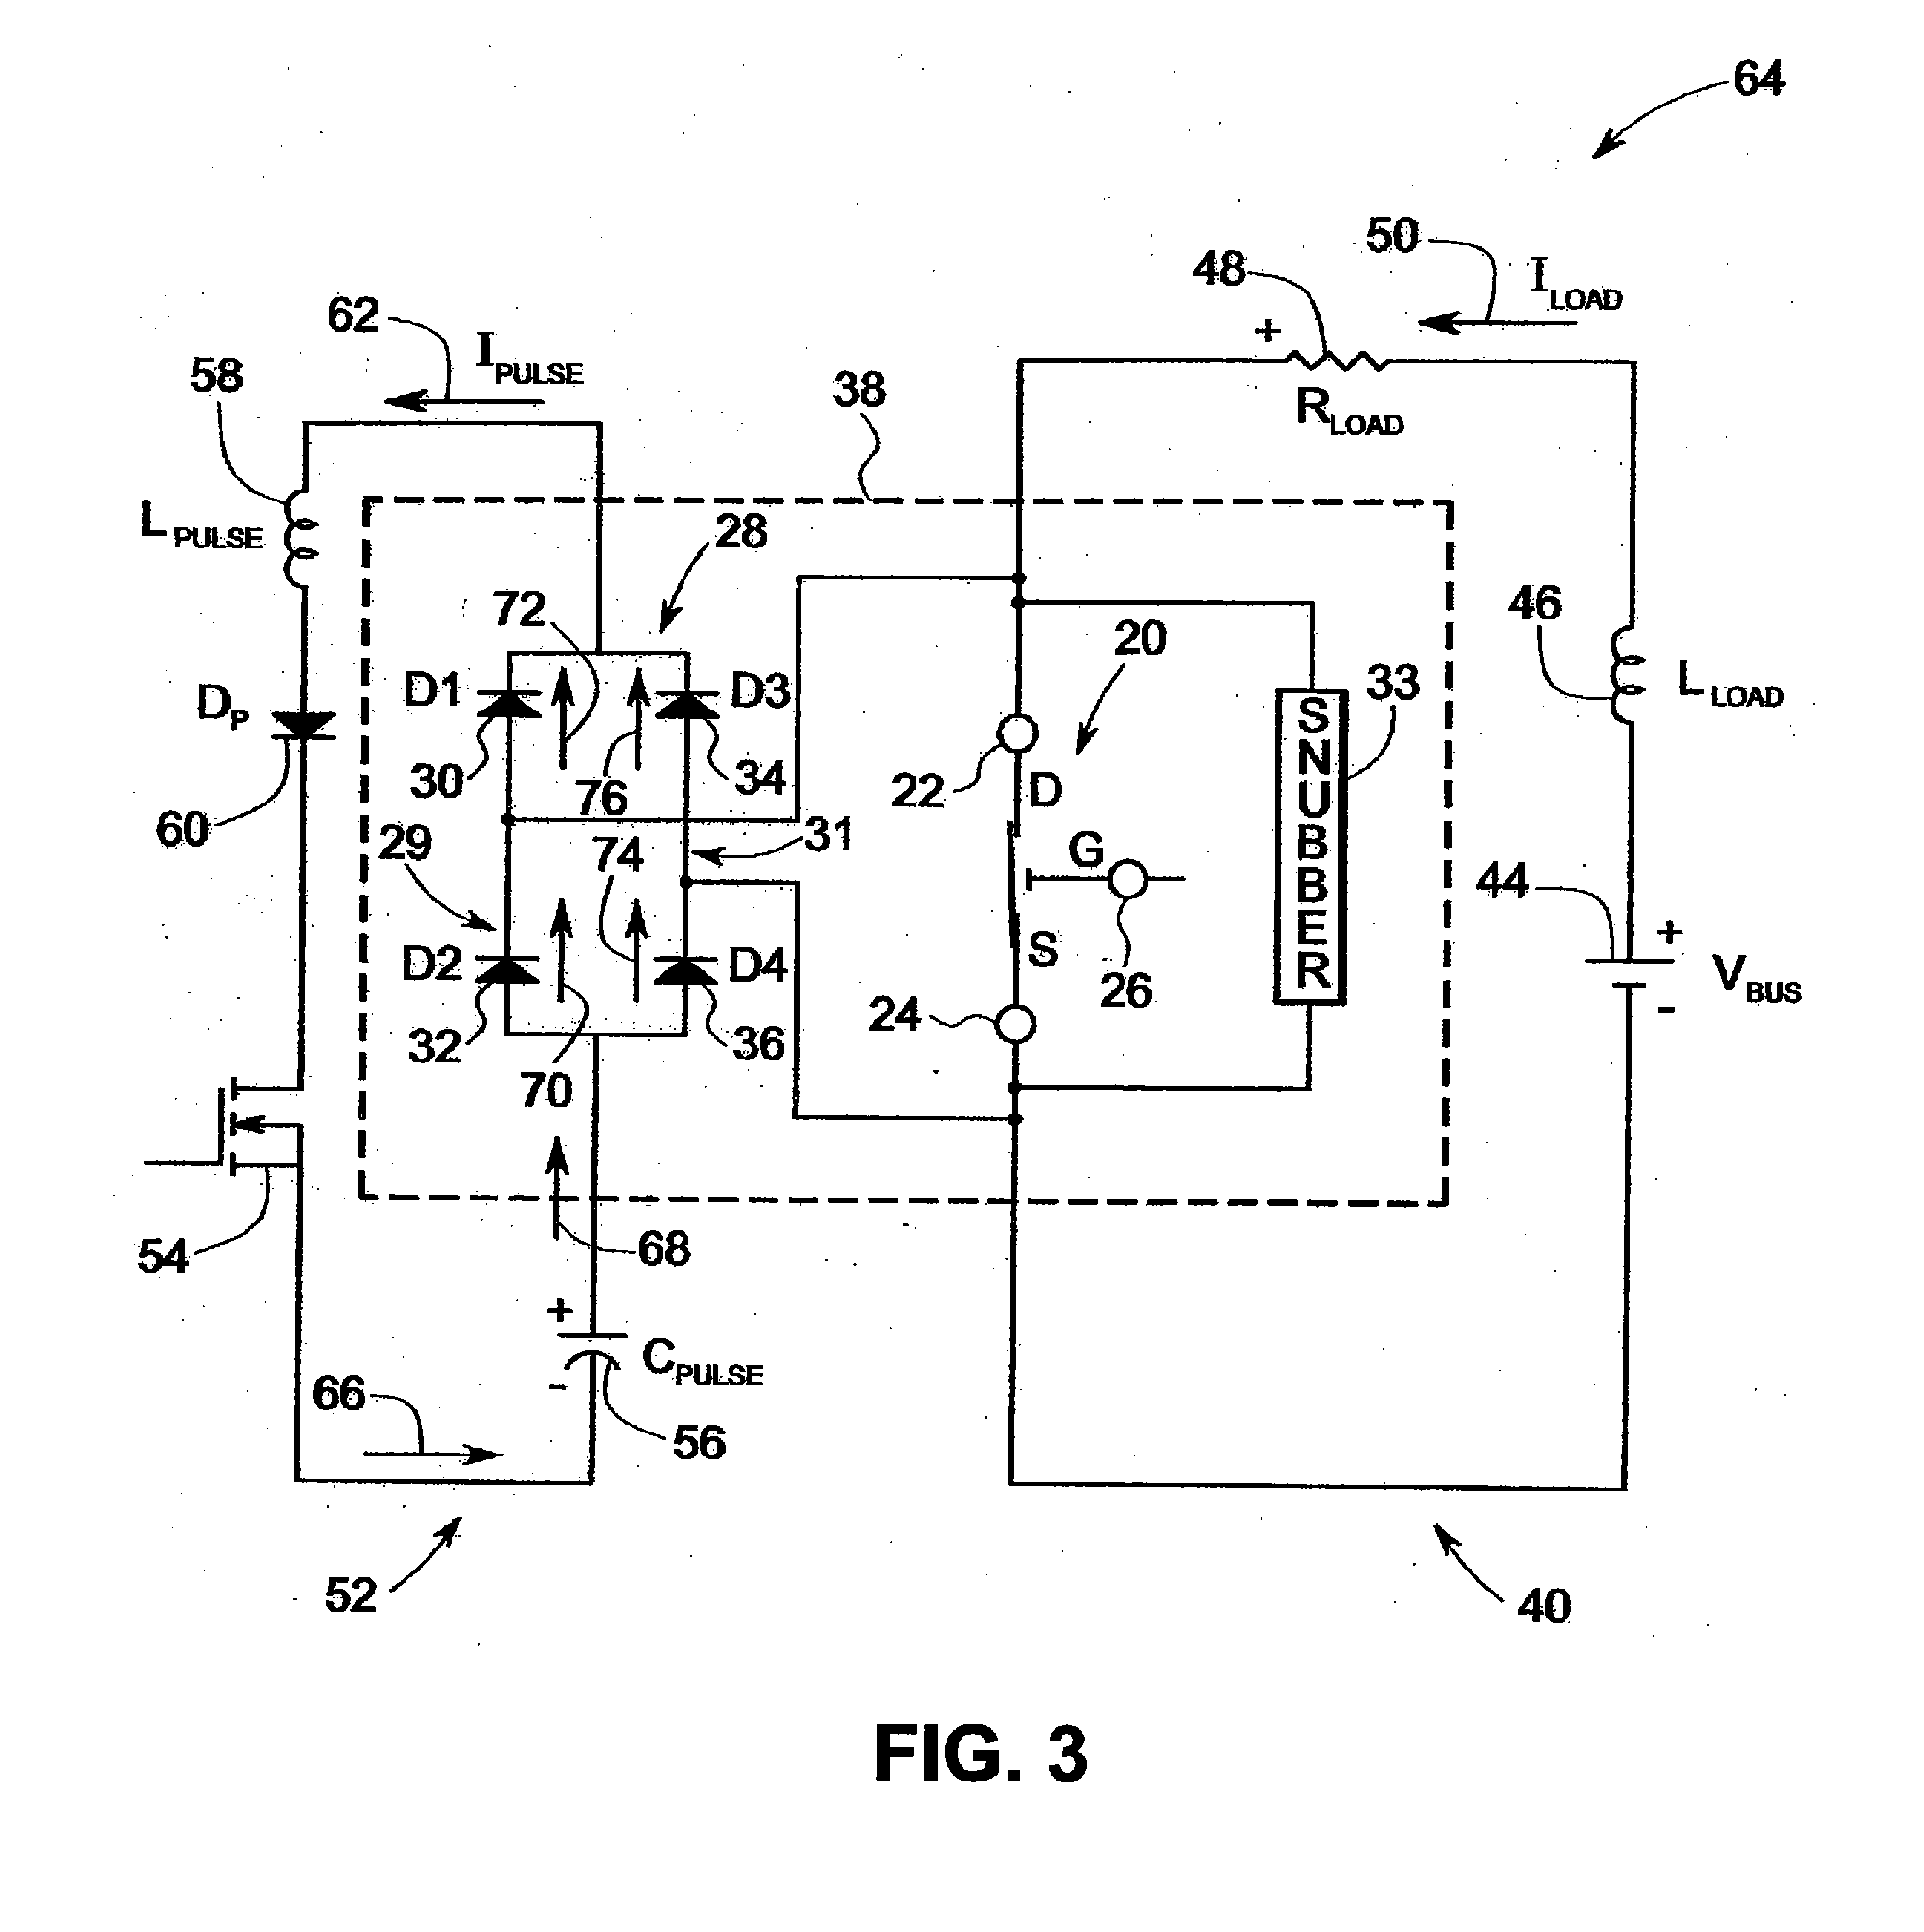 Micro-Electromechanical System Based Arc-Less Switching With Circuitry For Absorbing Electrical Energy During A Fault Condition